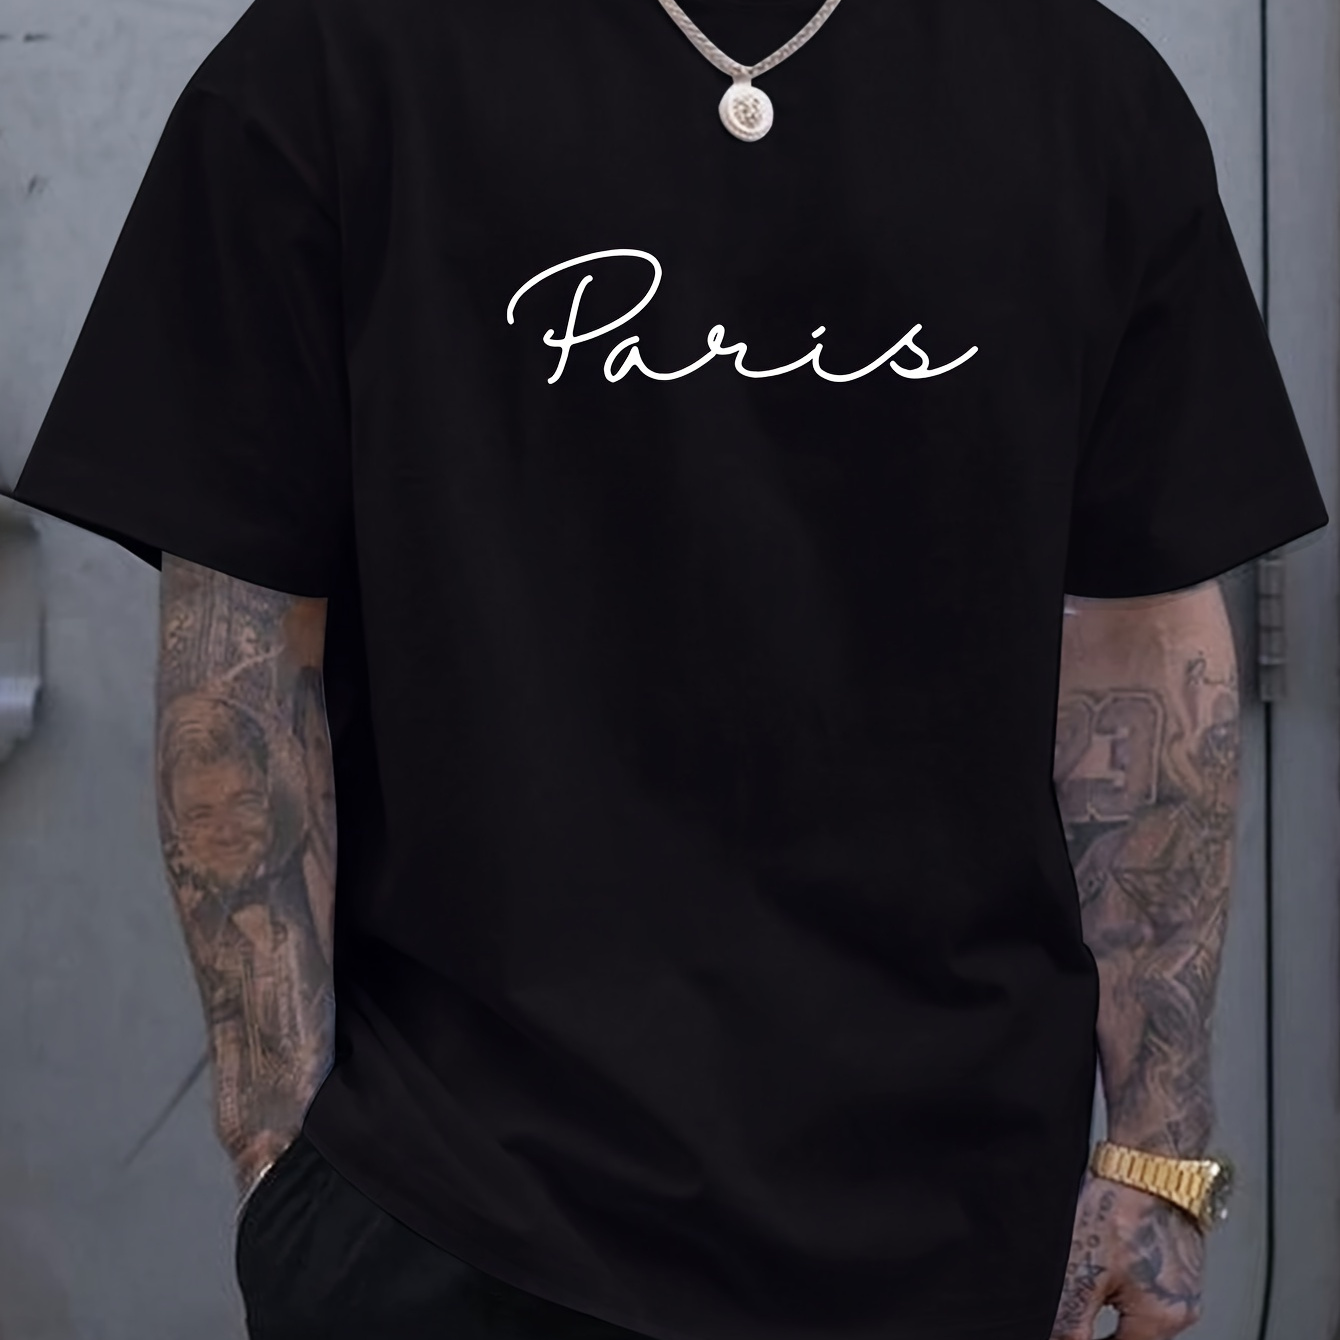 

Paris Letter Print Men's Round Crew Neck Short Sleeve Tee, Fashion T-shirt, Comfy Breathable Casual Sports Top For Spring Summer Holiday Leisure Vacation